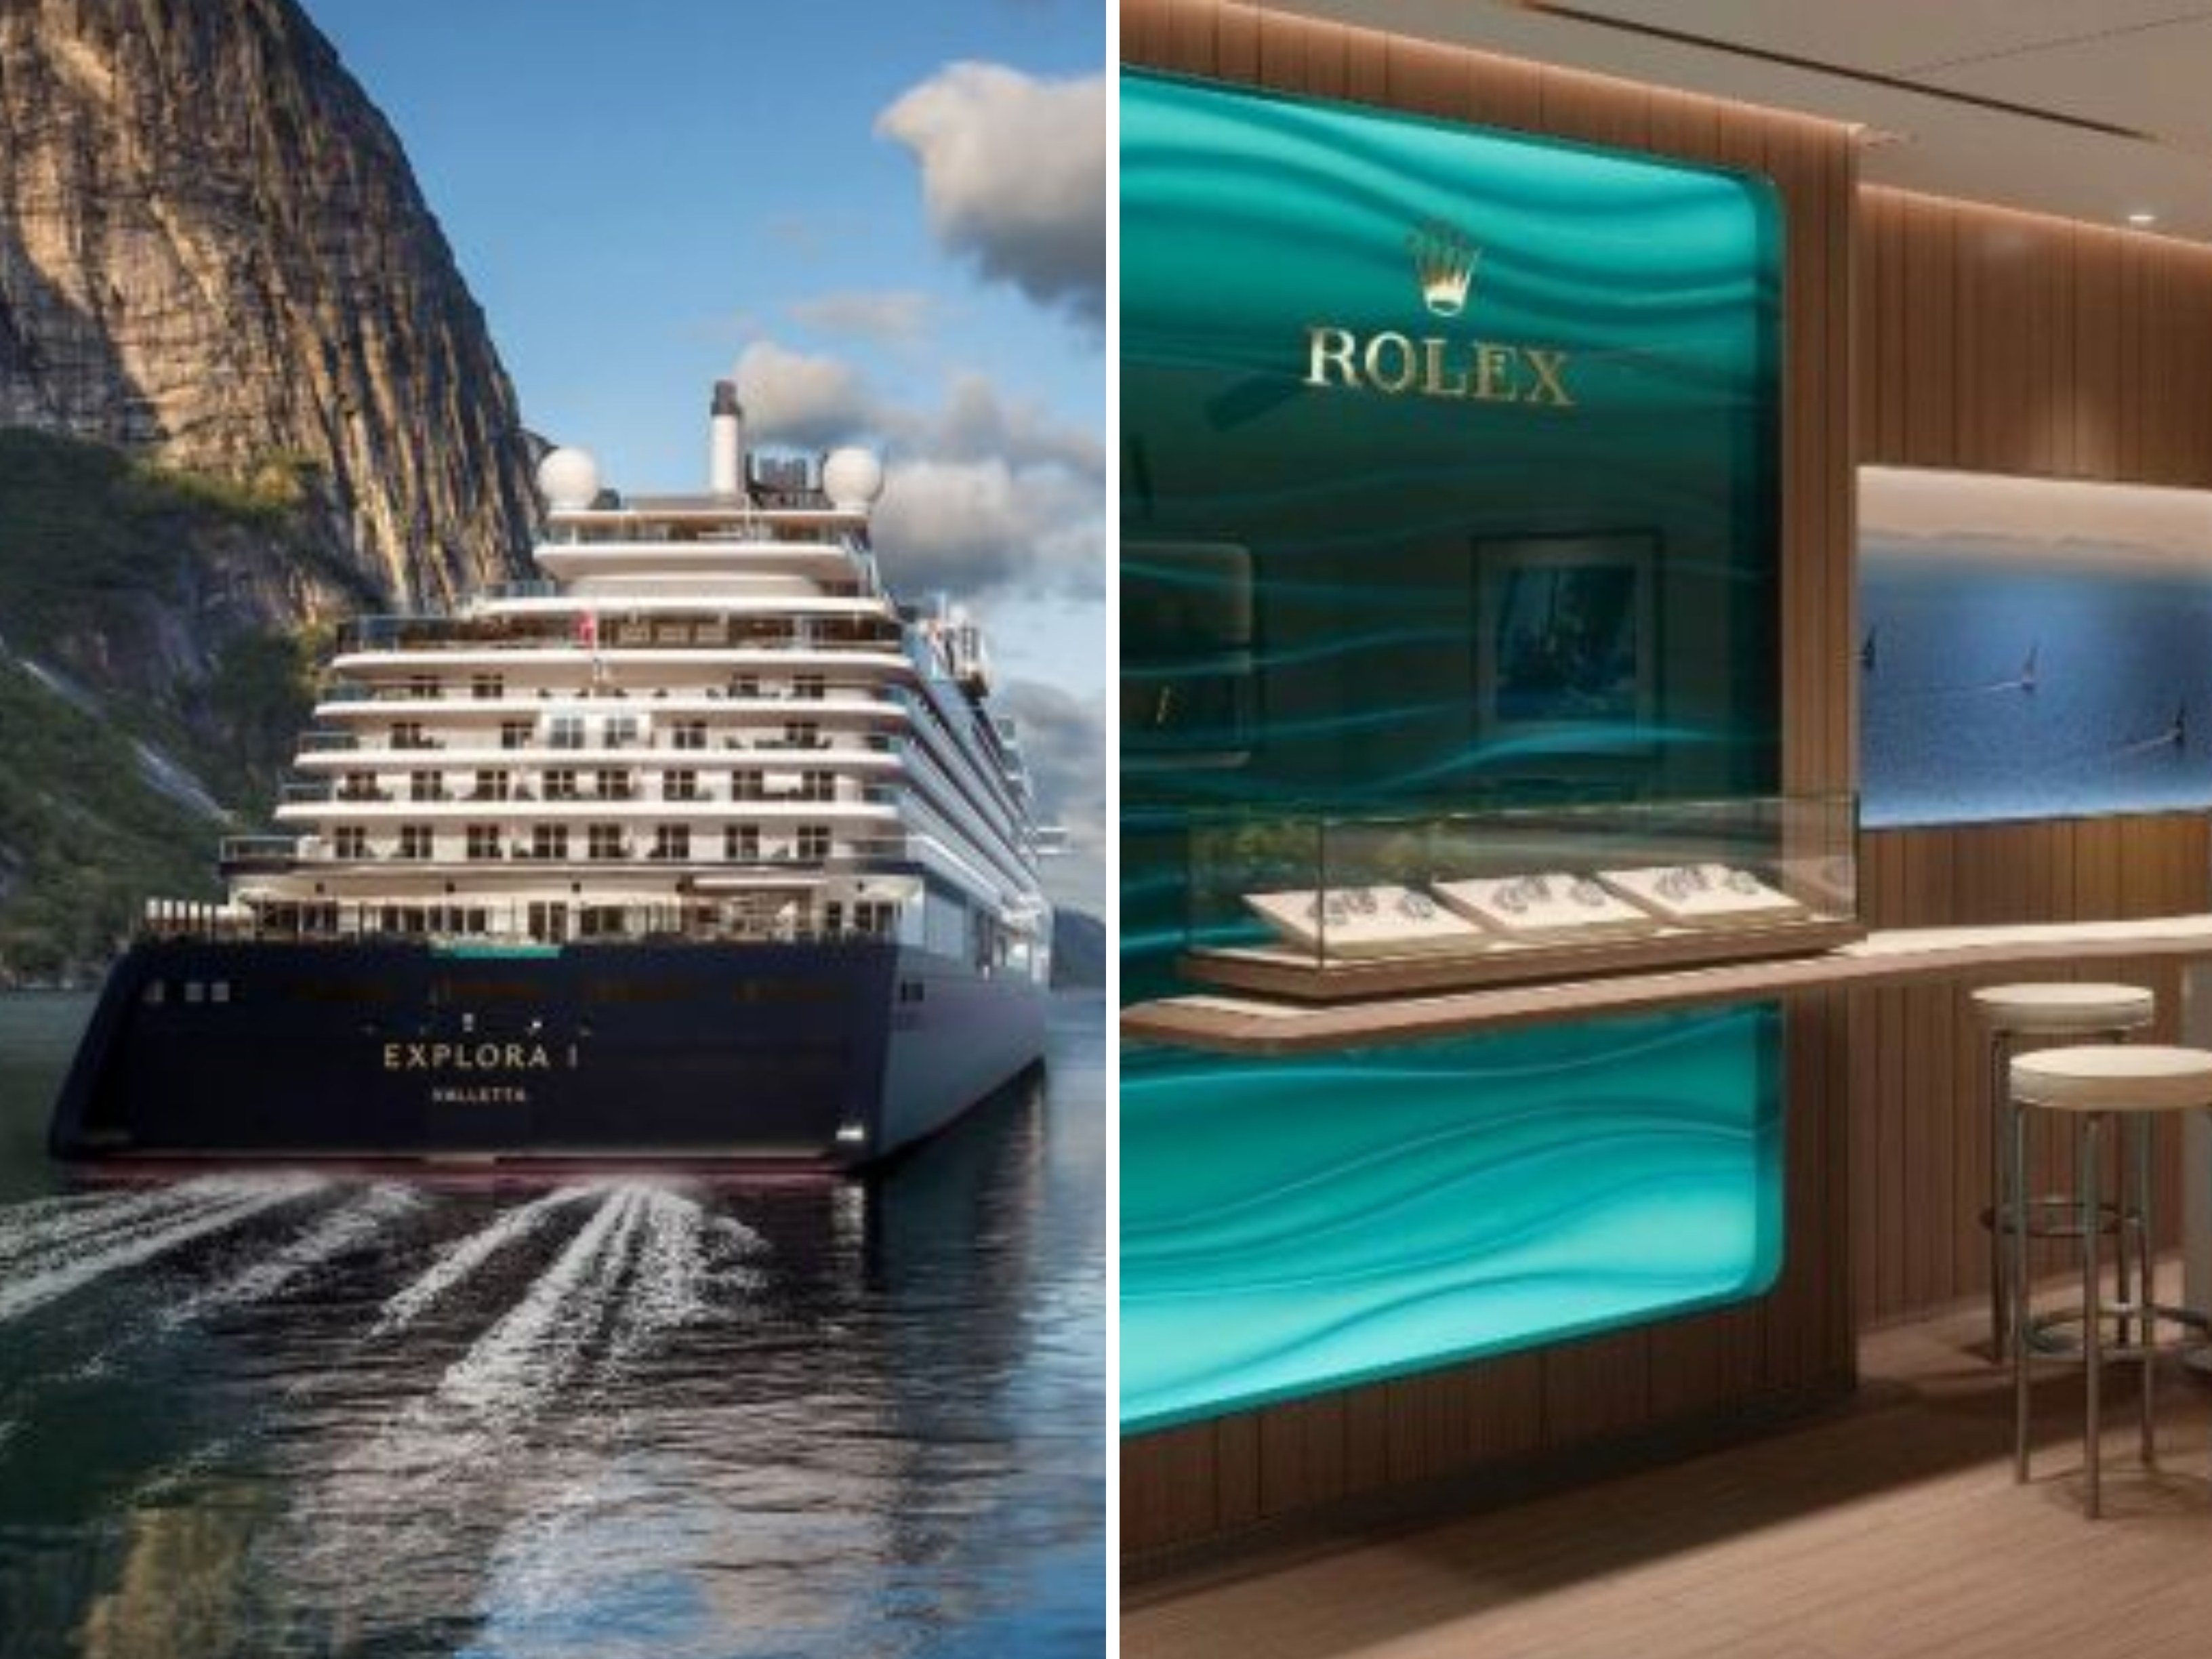 Explora I will play host to Rolex’s first boutique at sea. Photos: Handout